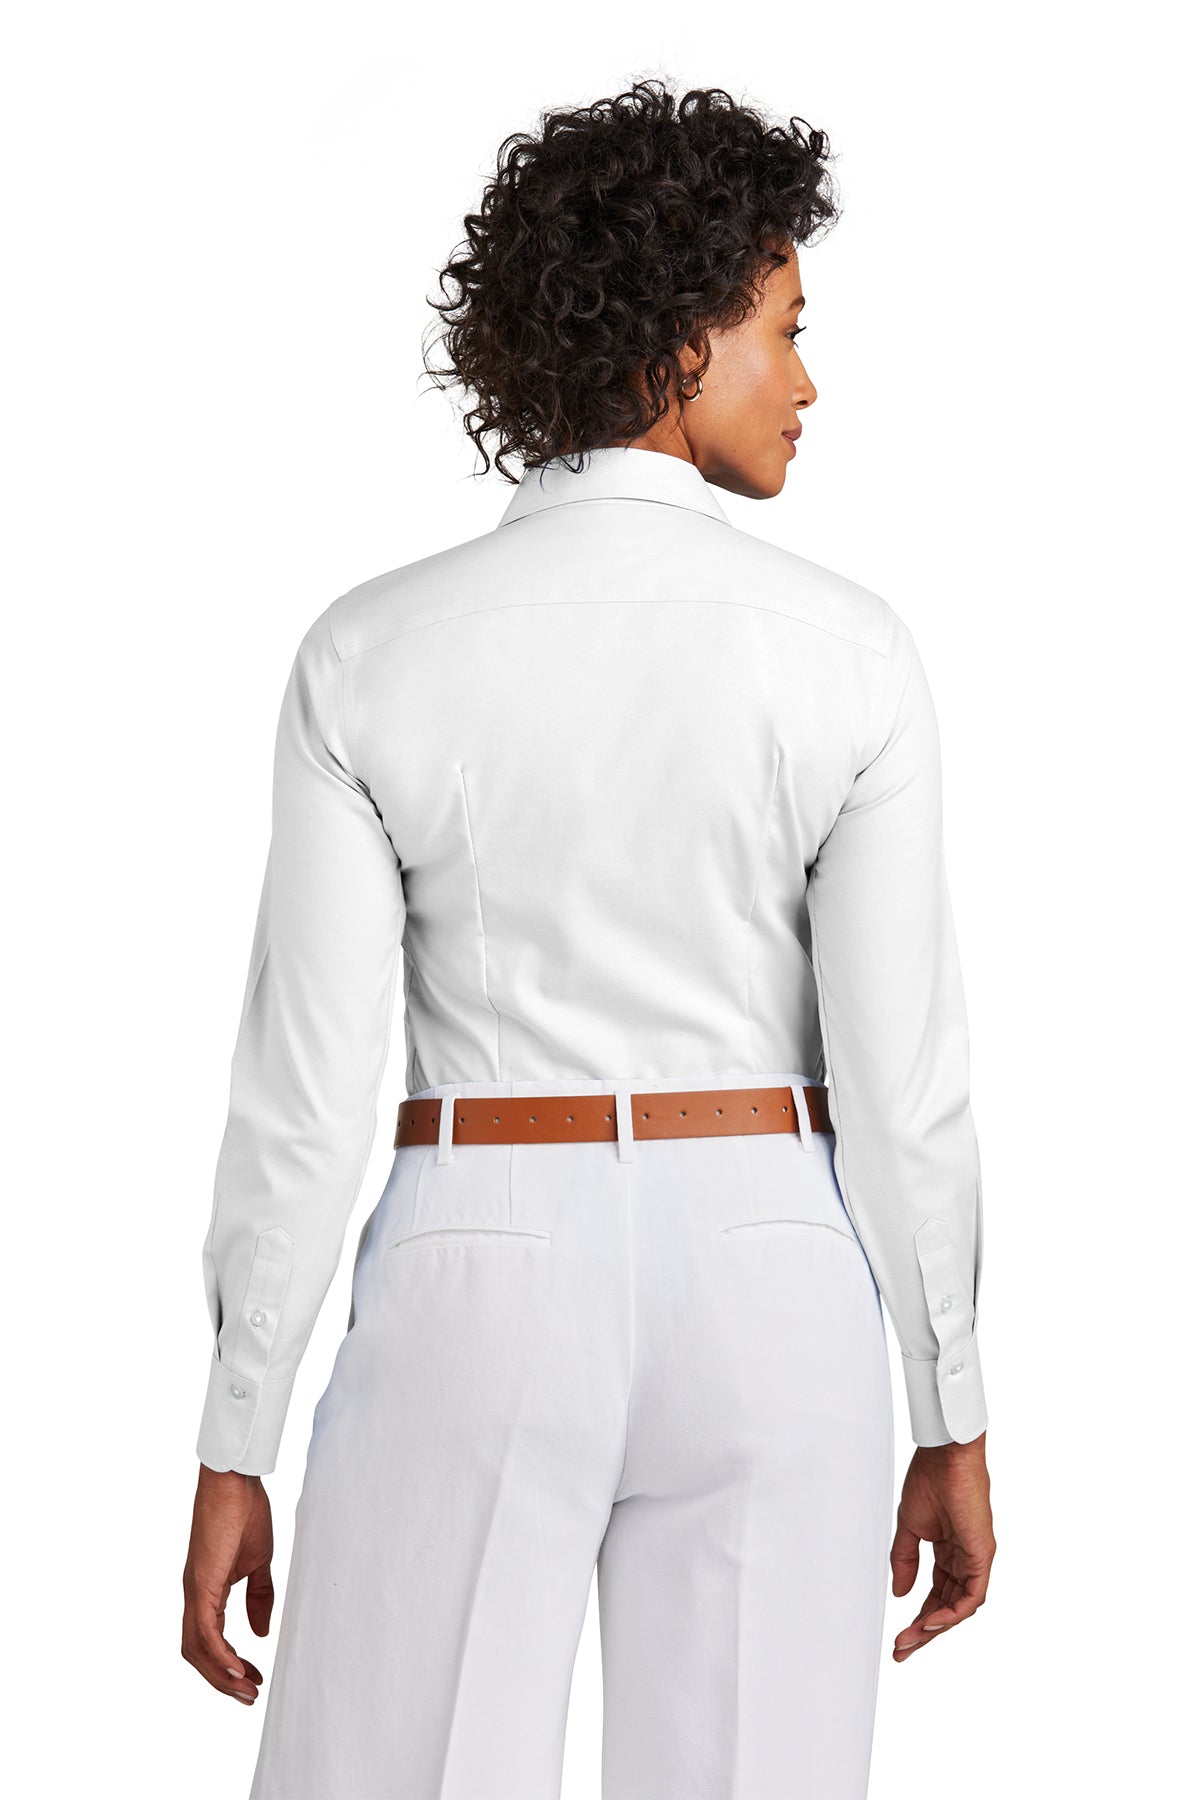 Brooks Brothers Womens Wrinkle-Free Stretch Pinpoint Shirt, White